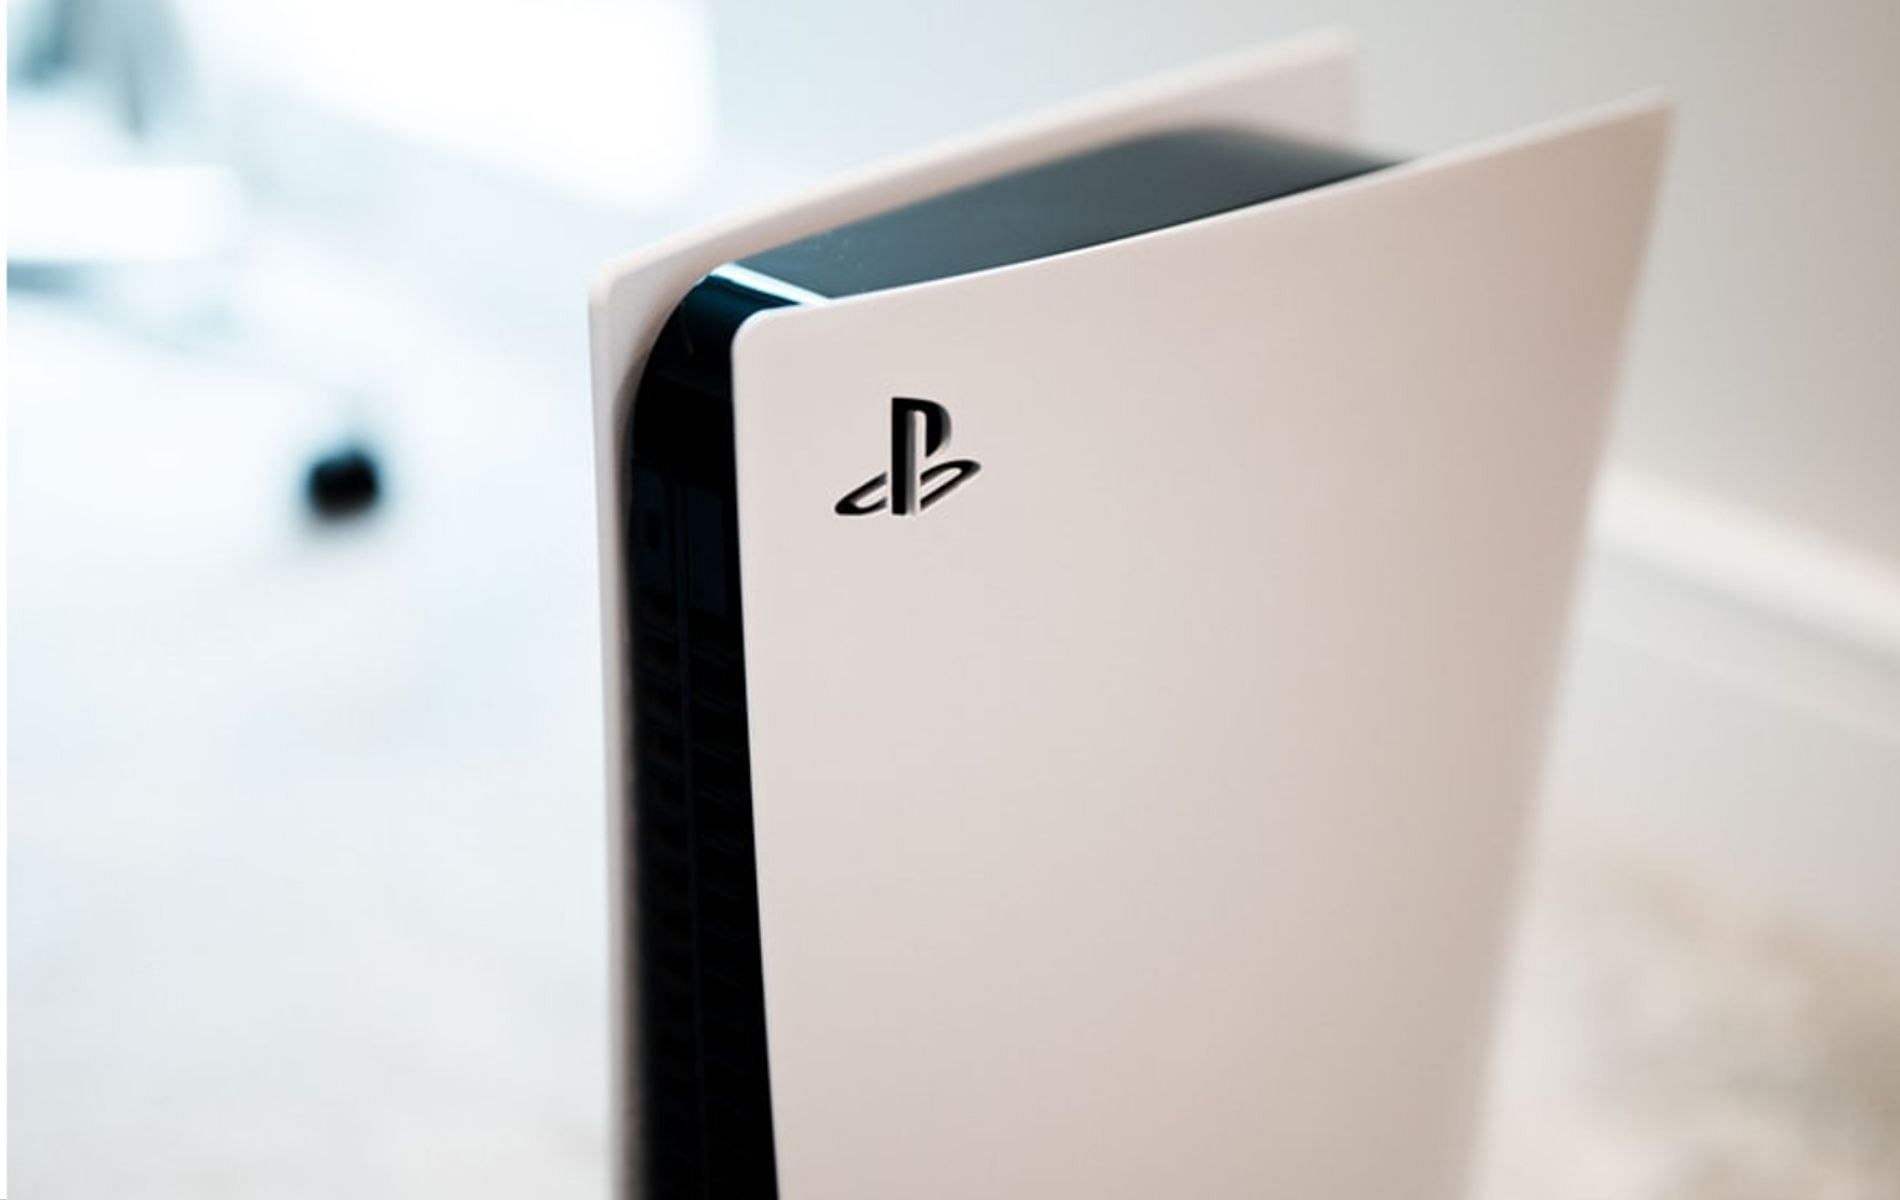 PS5 Pro specs and price speculations predict up to double PlayStation 5  performance for the same amount of money : r/Amd